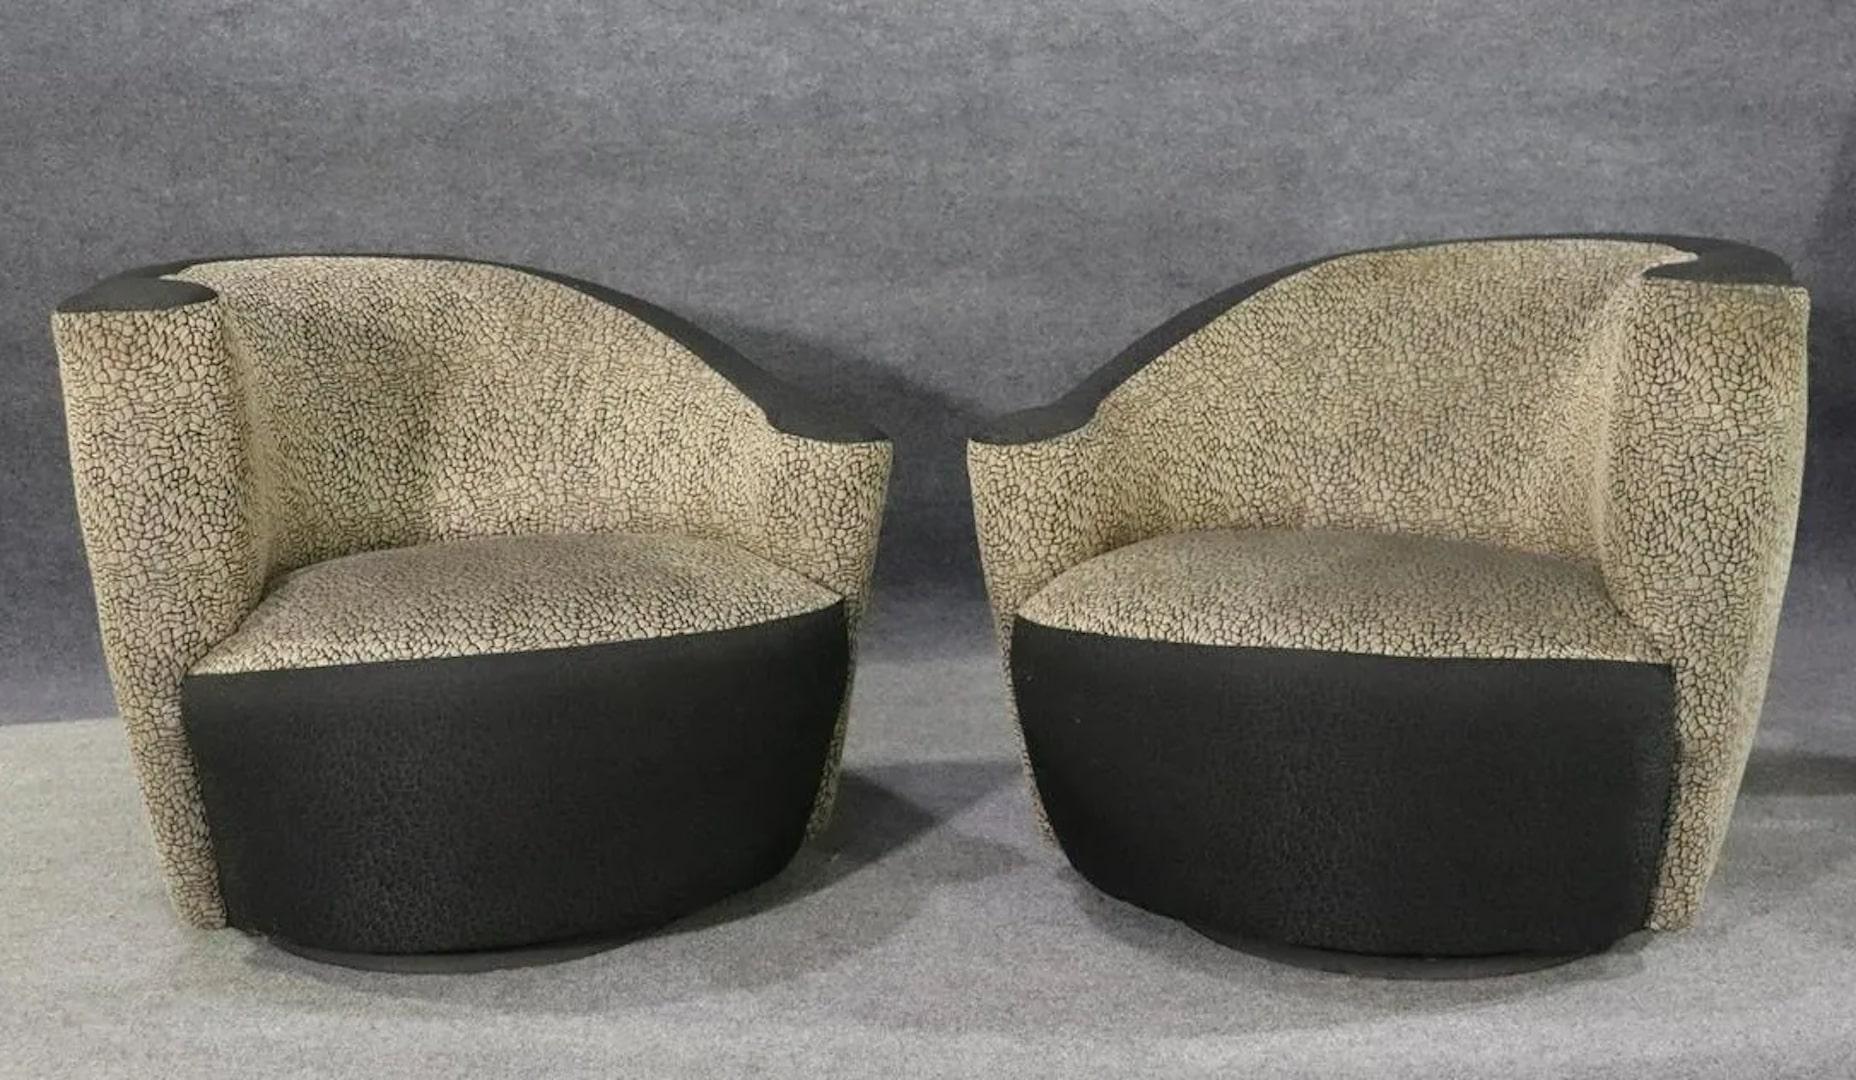 Pair of Mid-Century Modern swivel chairs in the style of Vladimir Kagan for Weiman. Wild shaped chairs on wheels with swivel action.
Please confirm location.